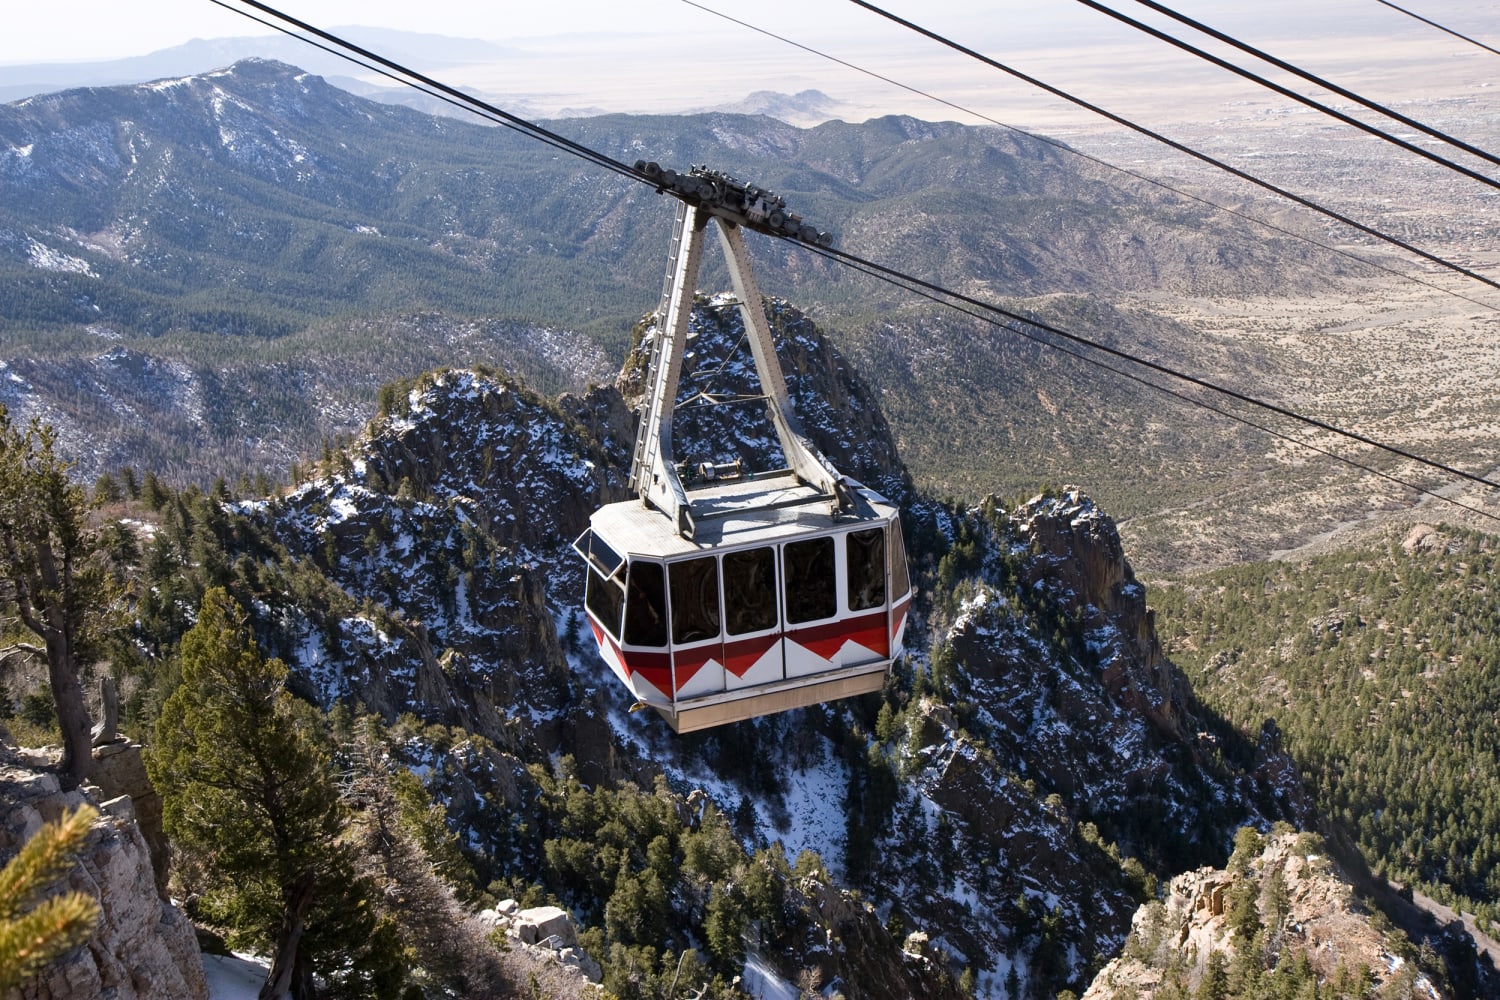 20 people rescued from Sandia Peak Tramway in New Mexico, one remains stuck